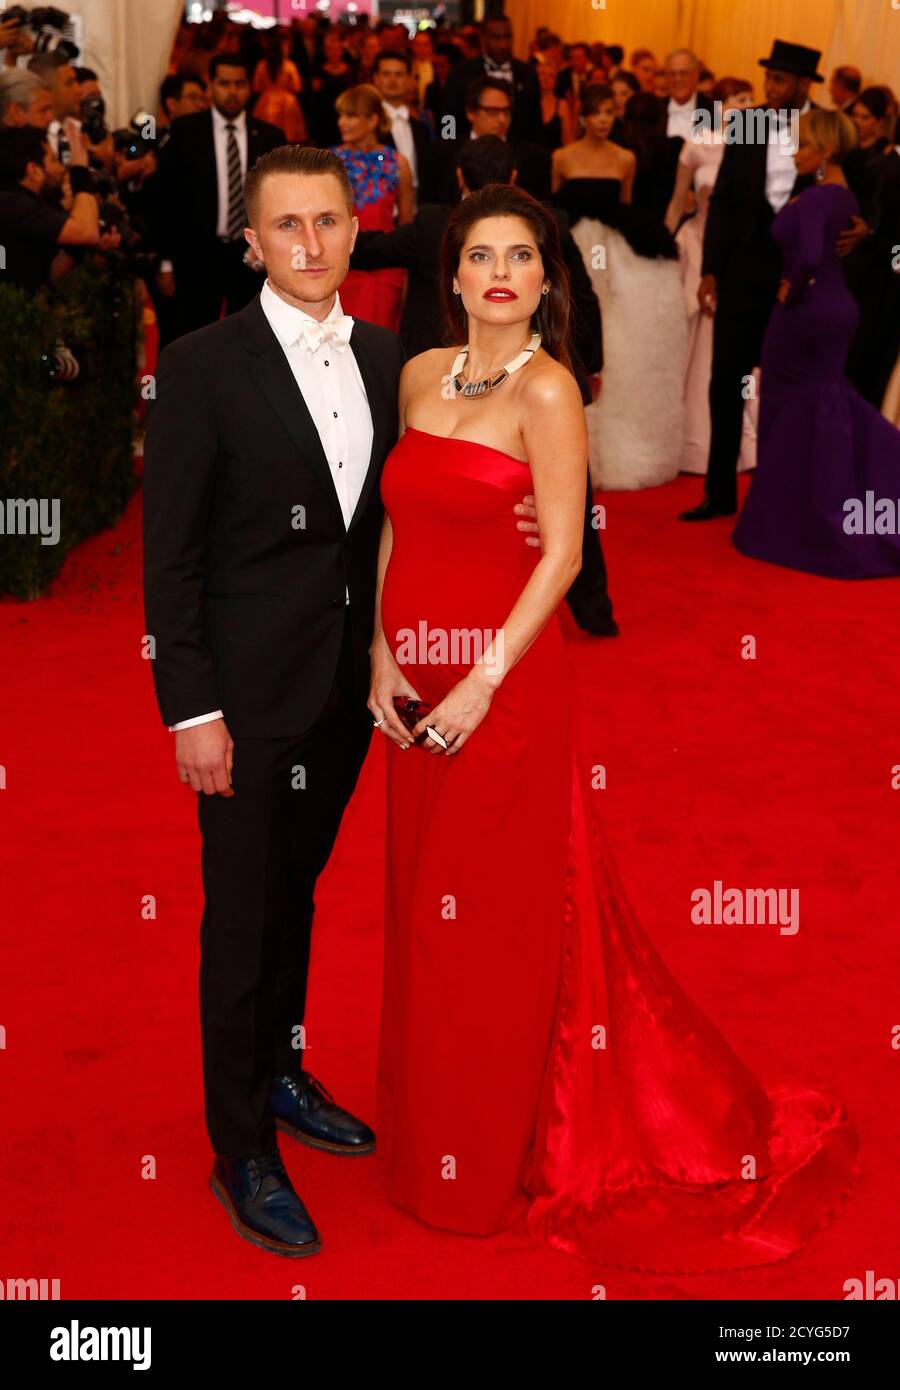 Actress Lake Bell and her husband Scott Campbell arrive at the Metropolitan Museum of Art Costume Institute Gala Benefit celebrating the opening of 'Charles James: Beyond Fashion' in Upper Manhattan, New York, May 5, 2014.   REUTERS/Lucas Jackson (UNITED STATES  - Tags: ENTERTAINMENT FASHION) Stock Photo